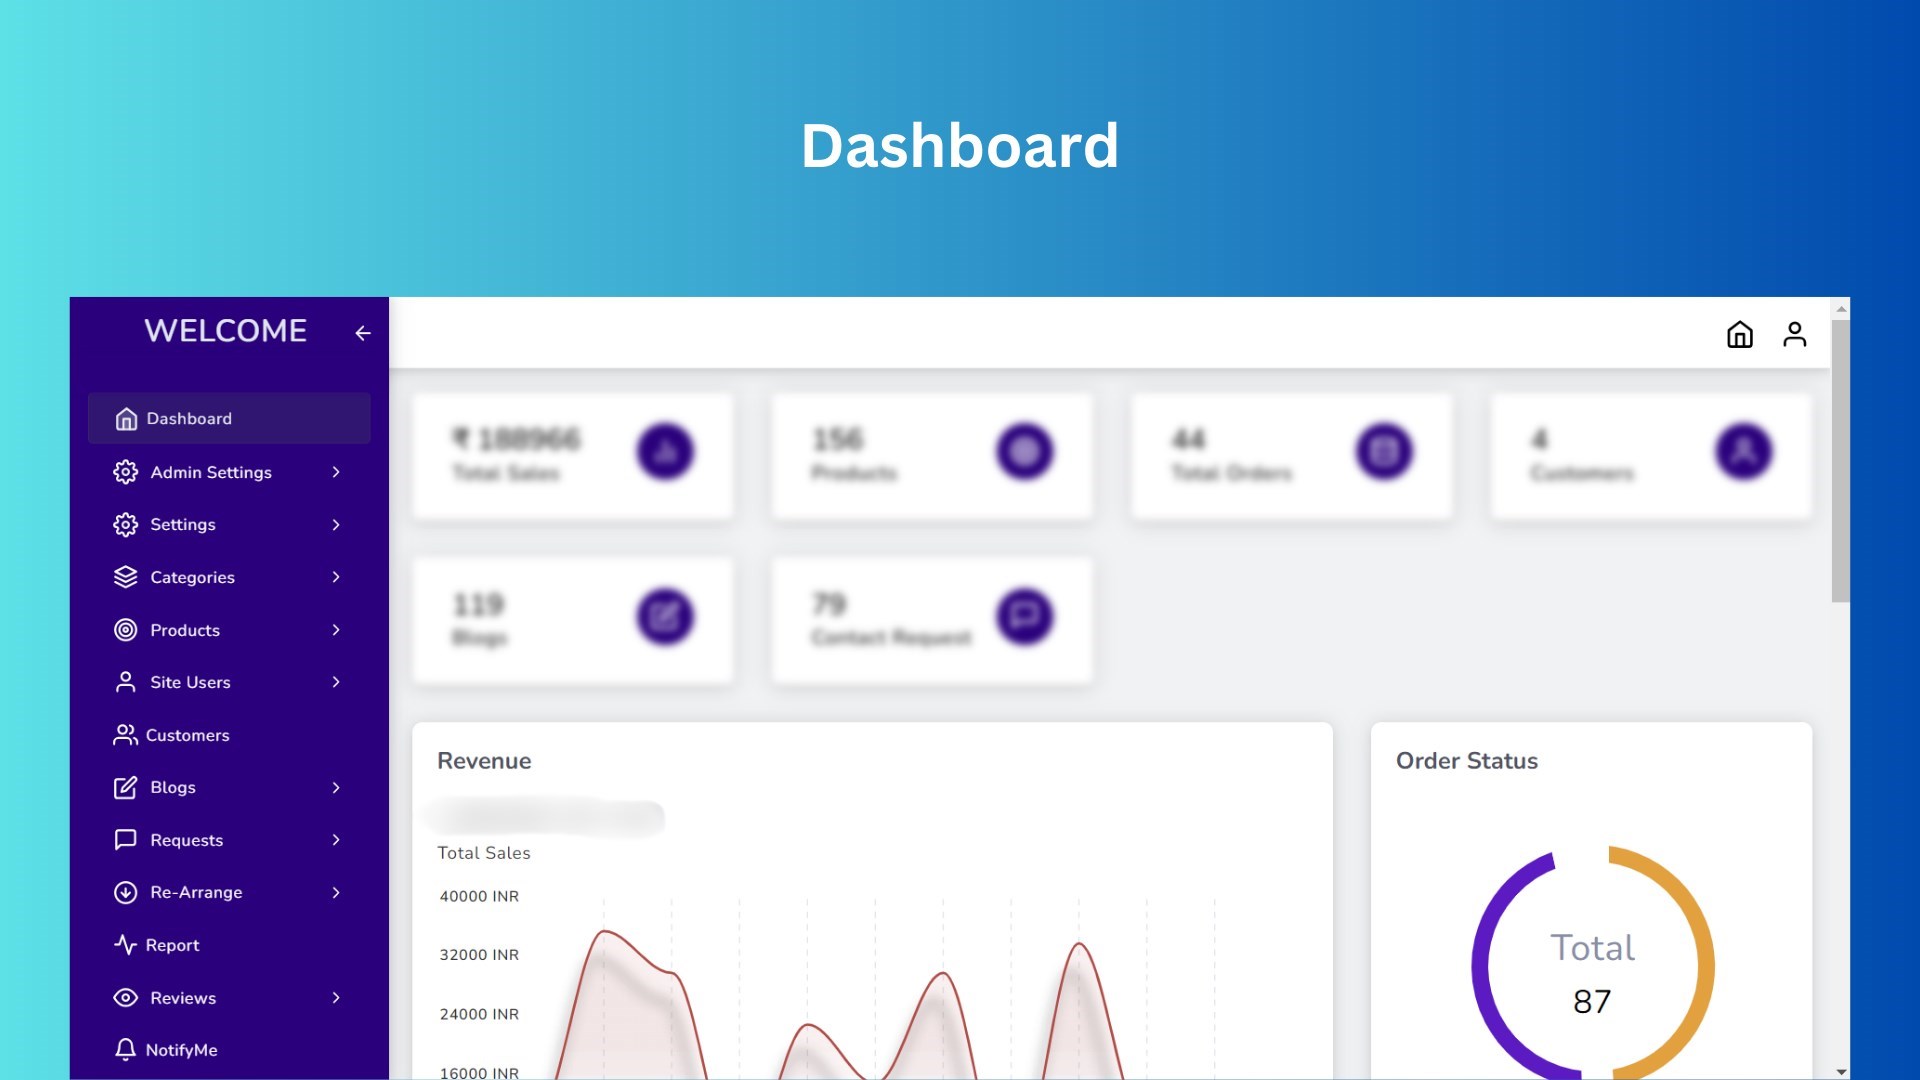 The dashboard presents comprehensive sales details alongside a graphical representation of sales performance.